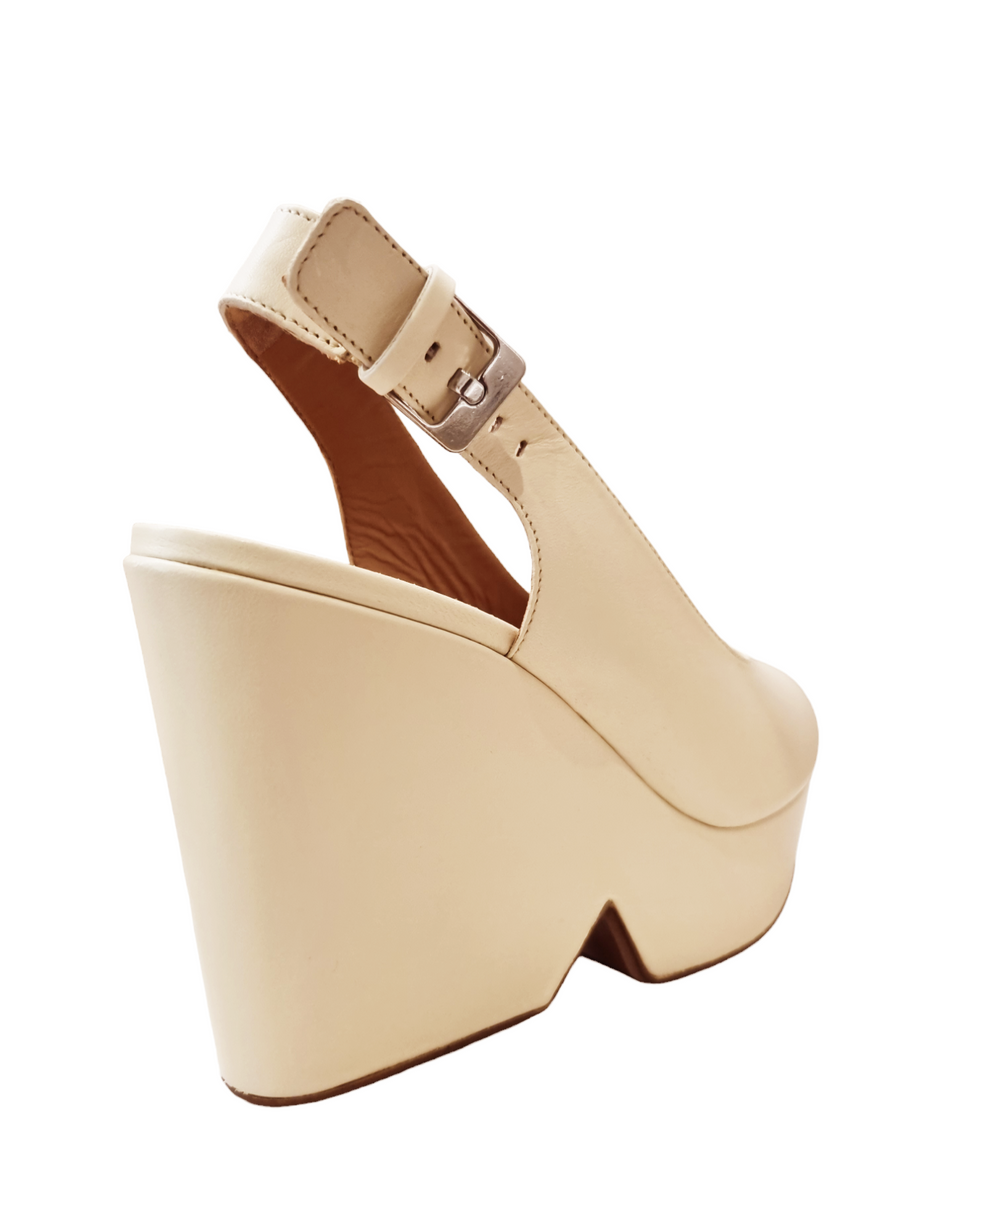 Dylan Ivory Leather Platform Sandals - Clergerie - Liberty Shoes Australia